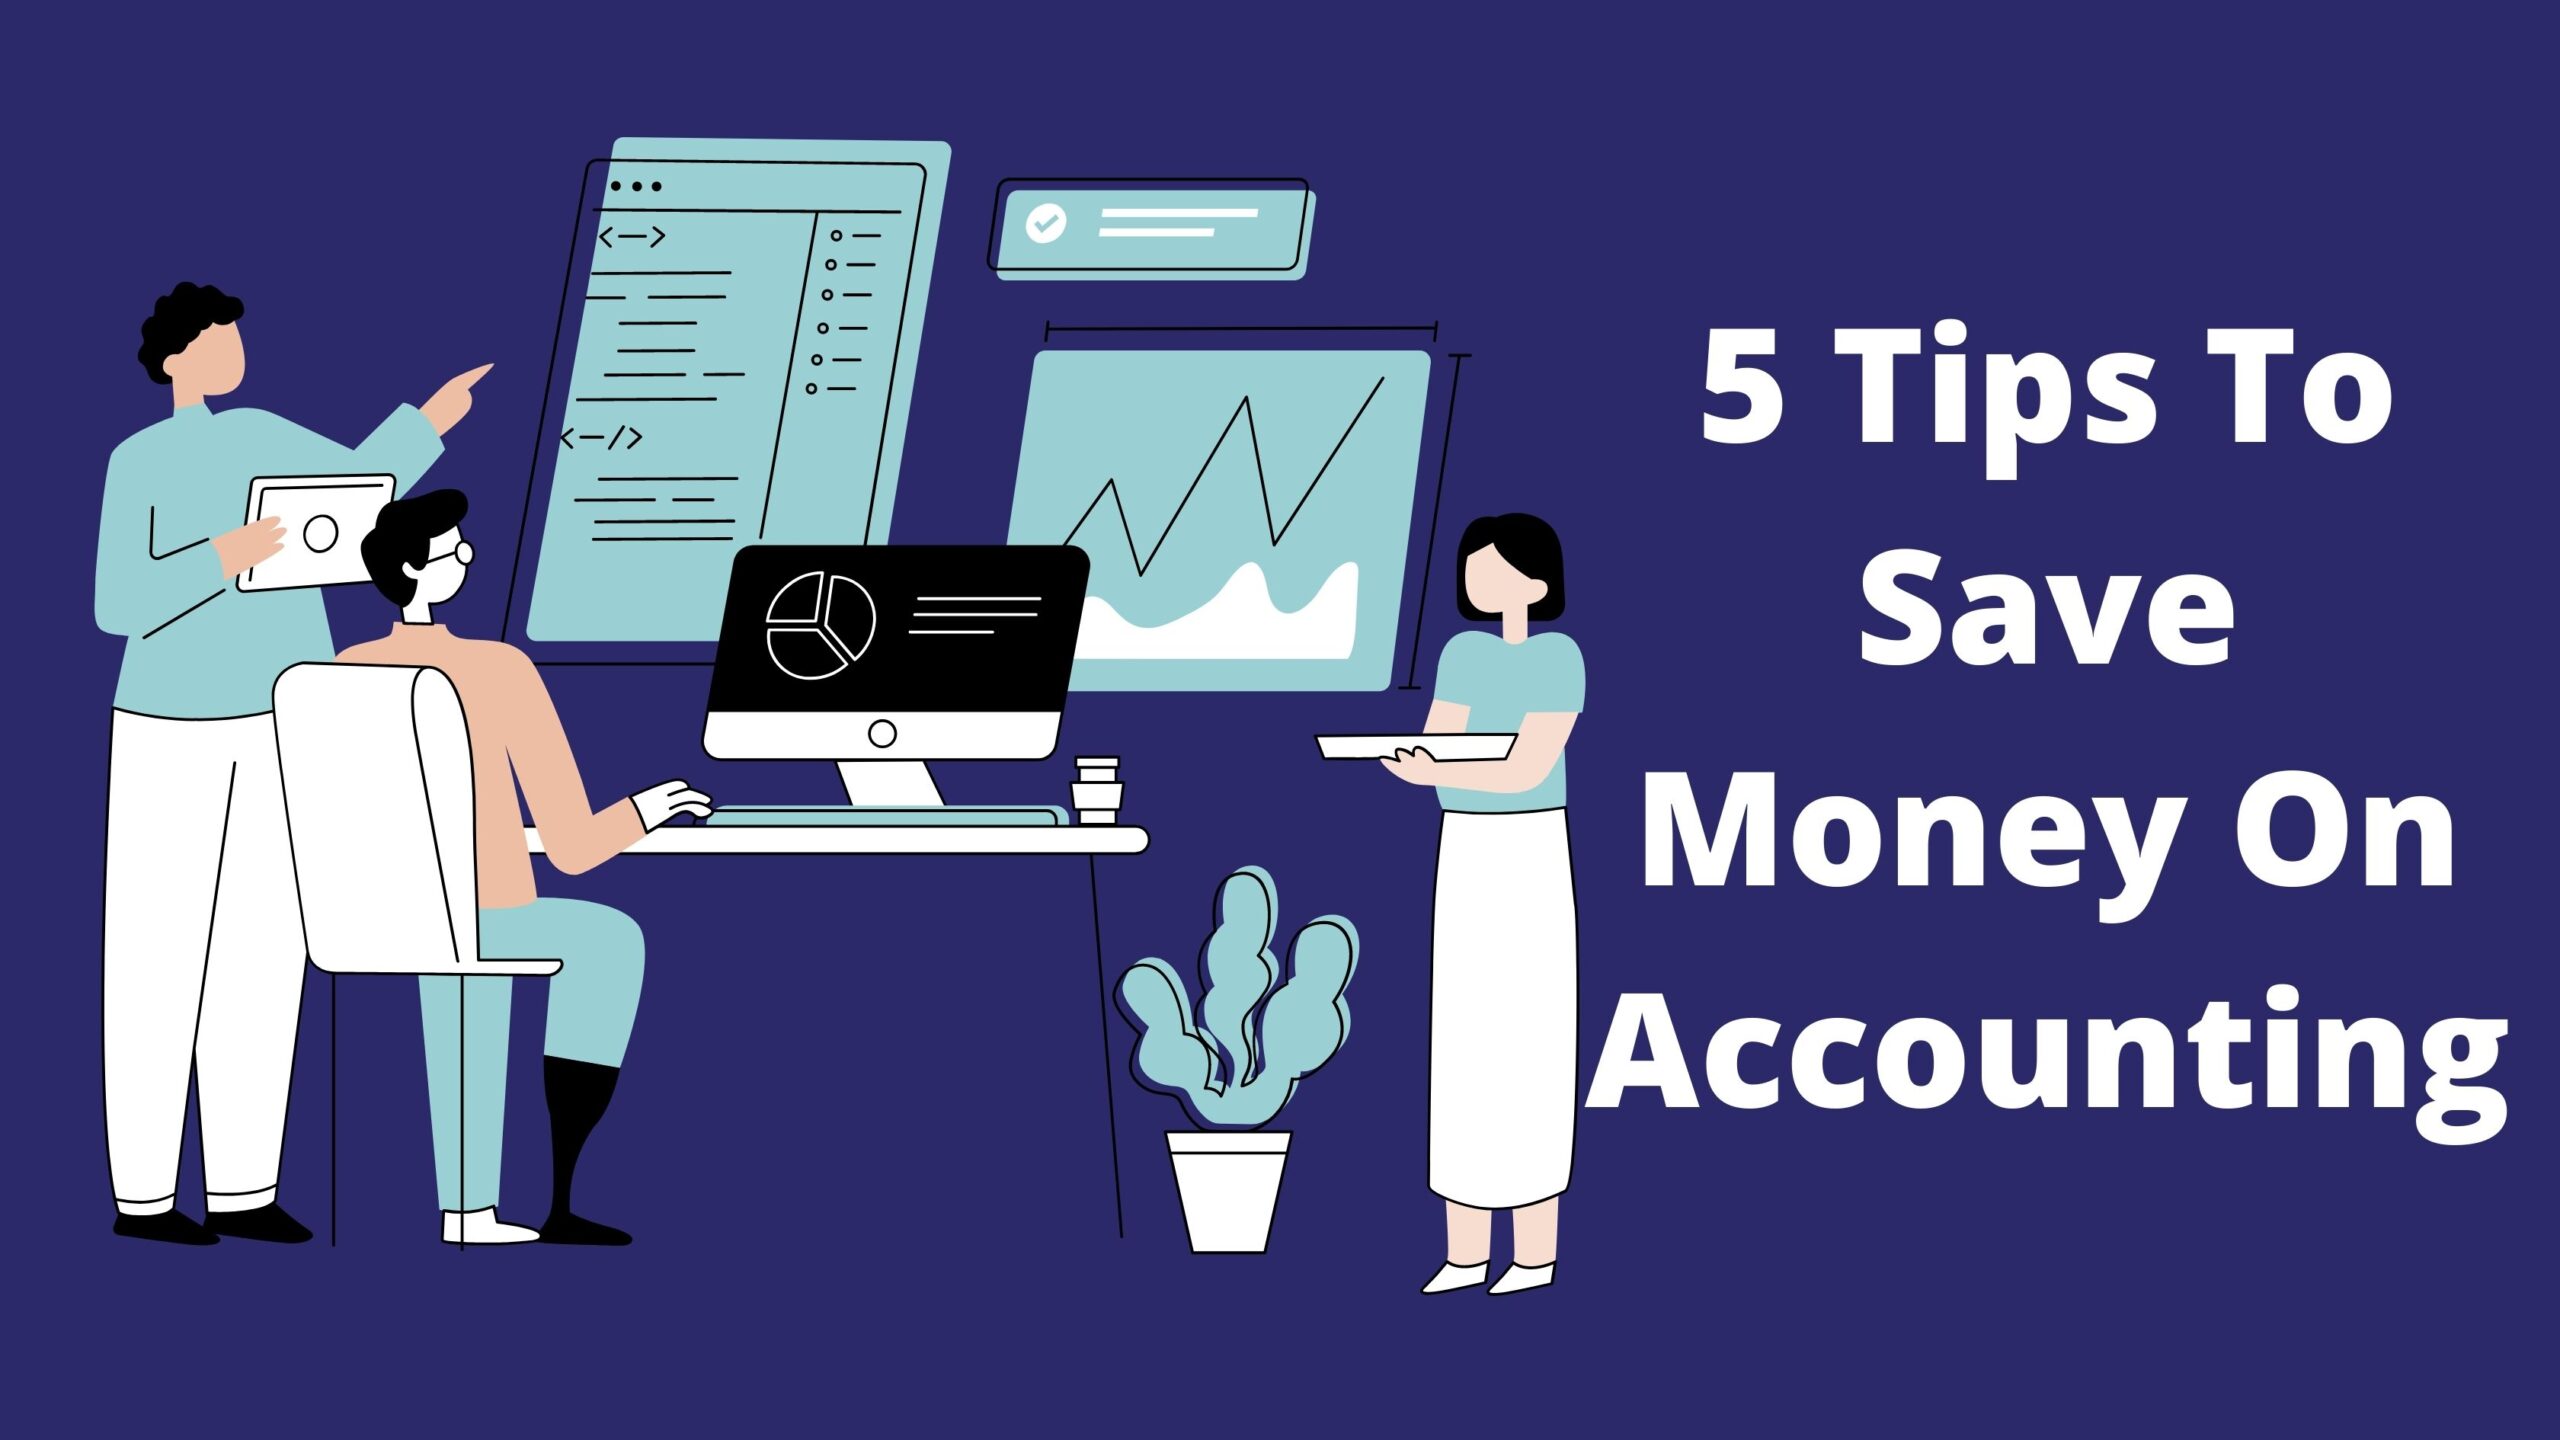 Five tips to save money on accounting